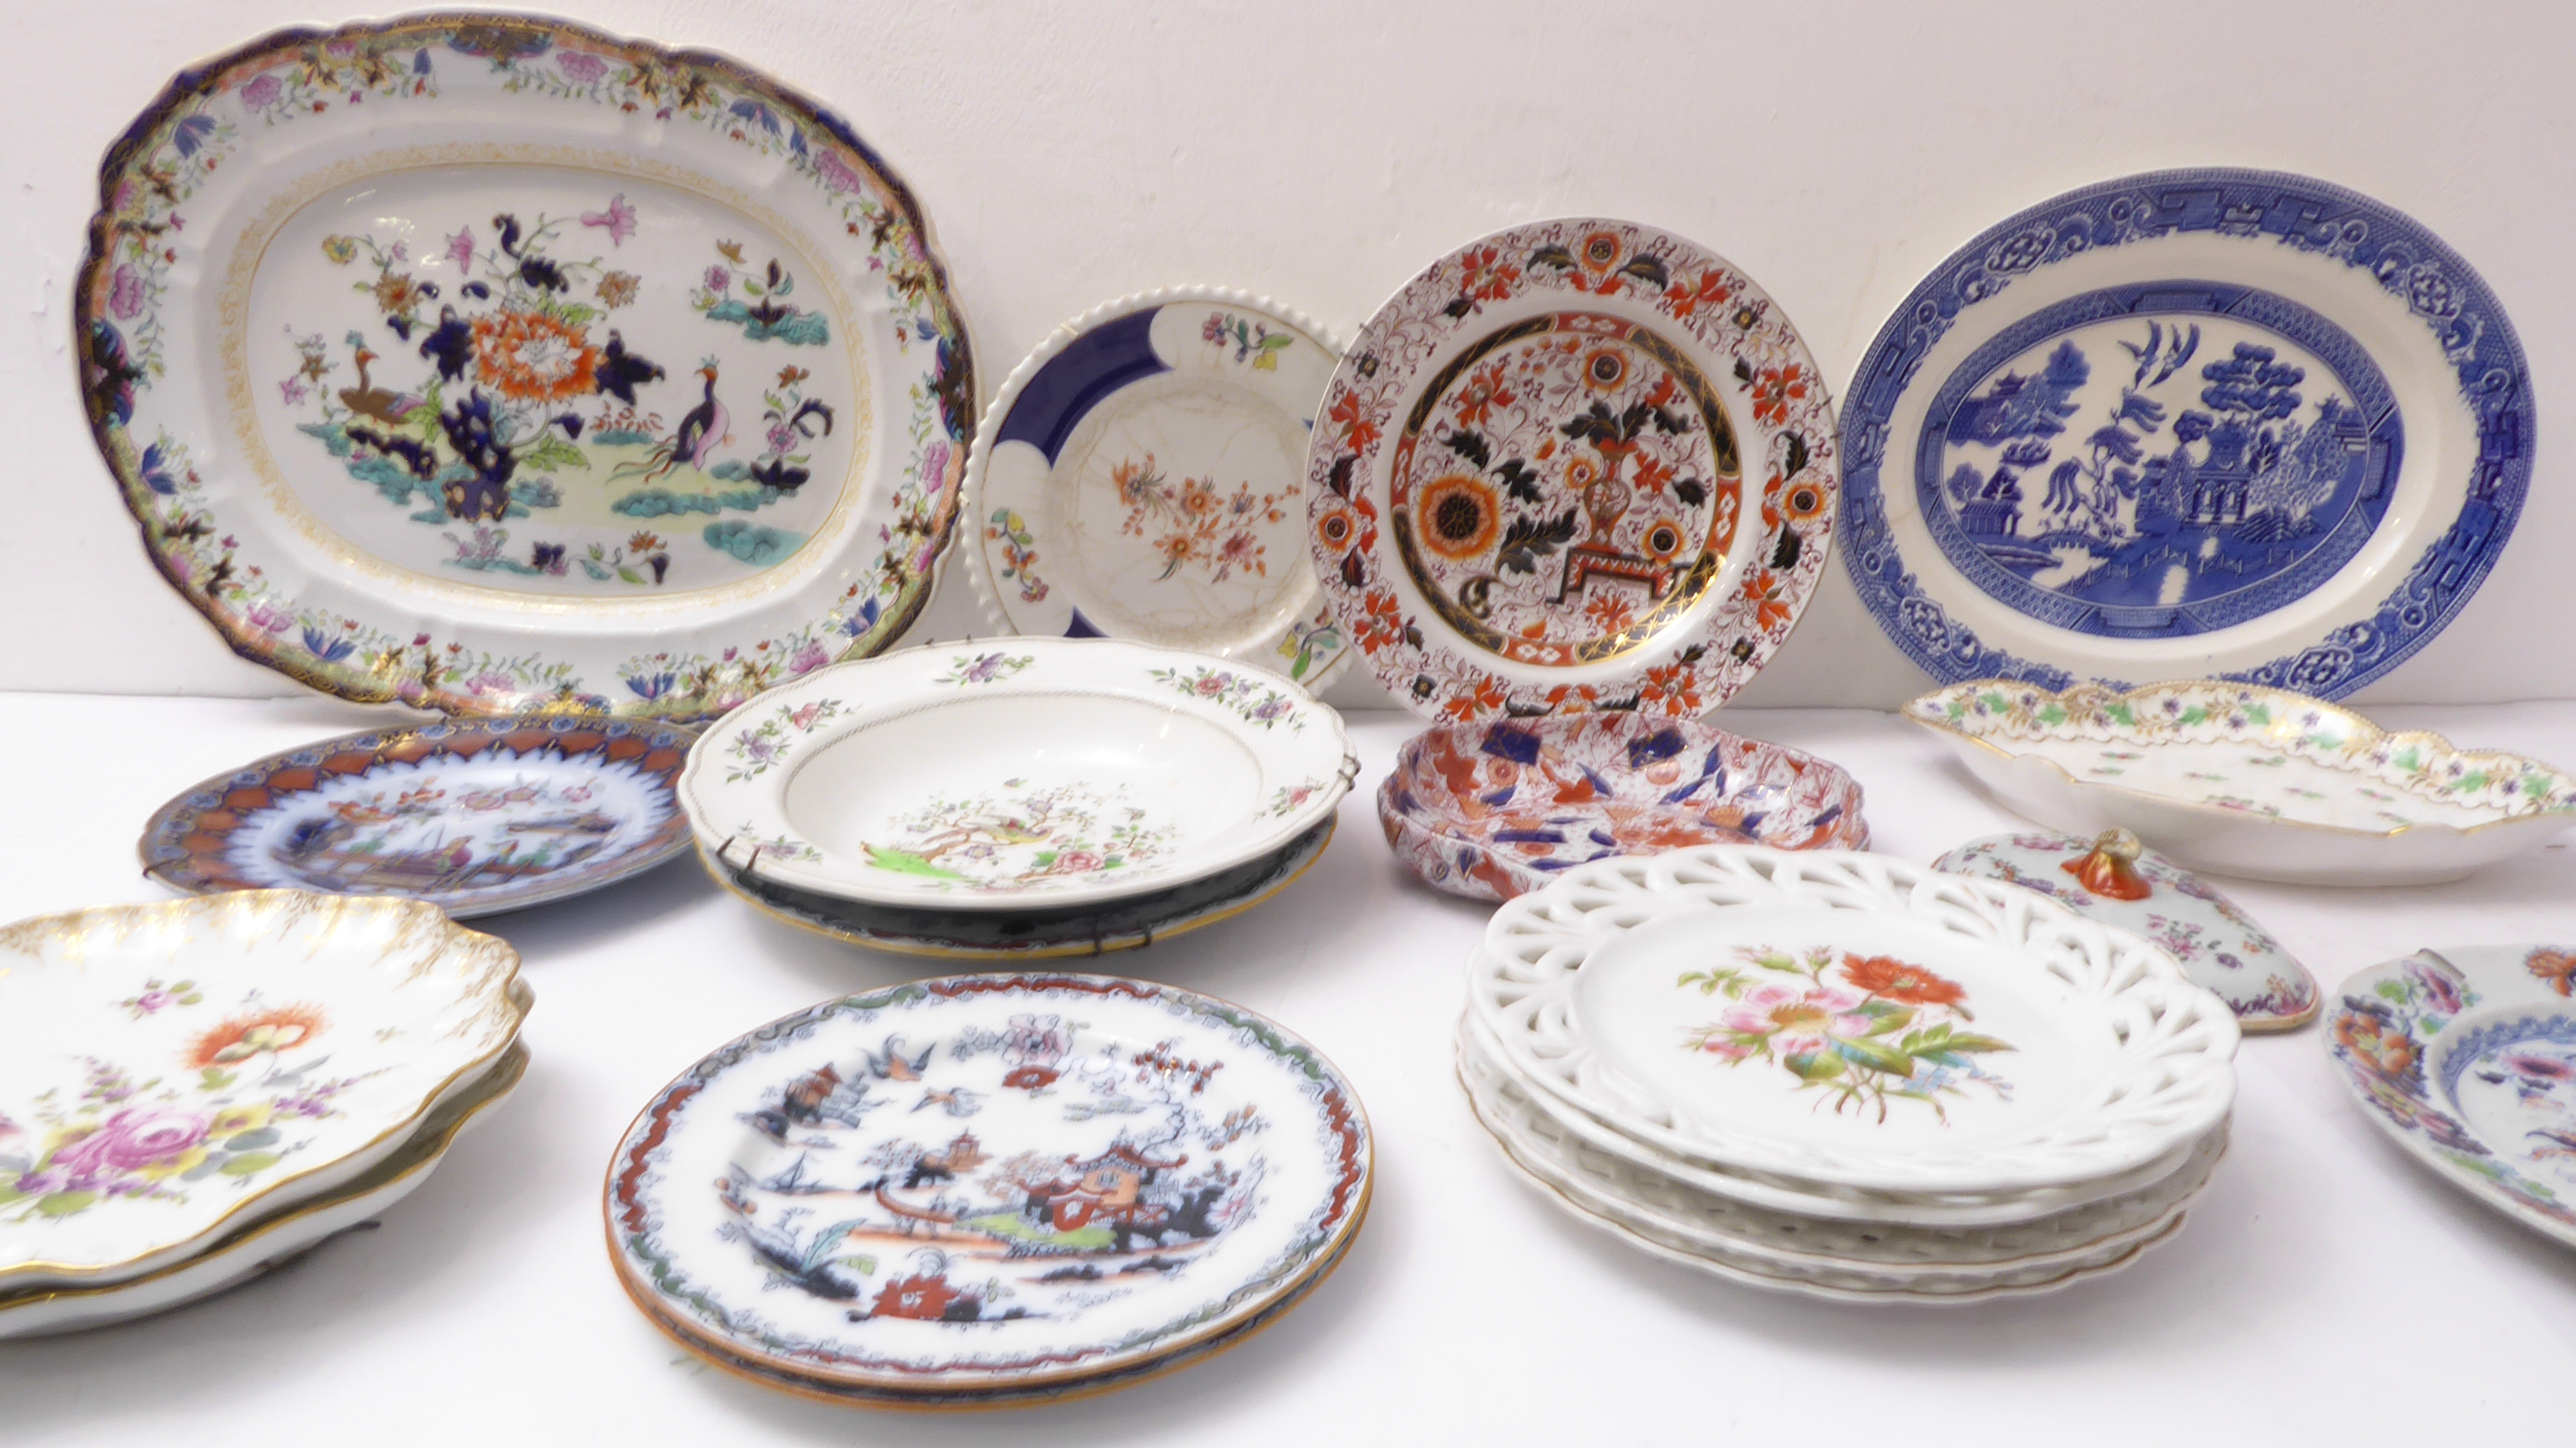 A selection of mostly 19th century decorative plates, bowls and porcelain dishes to include